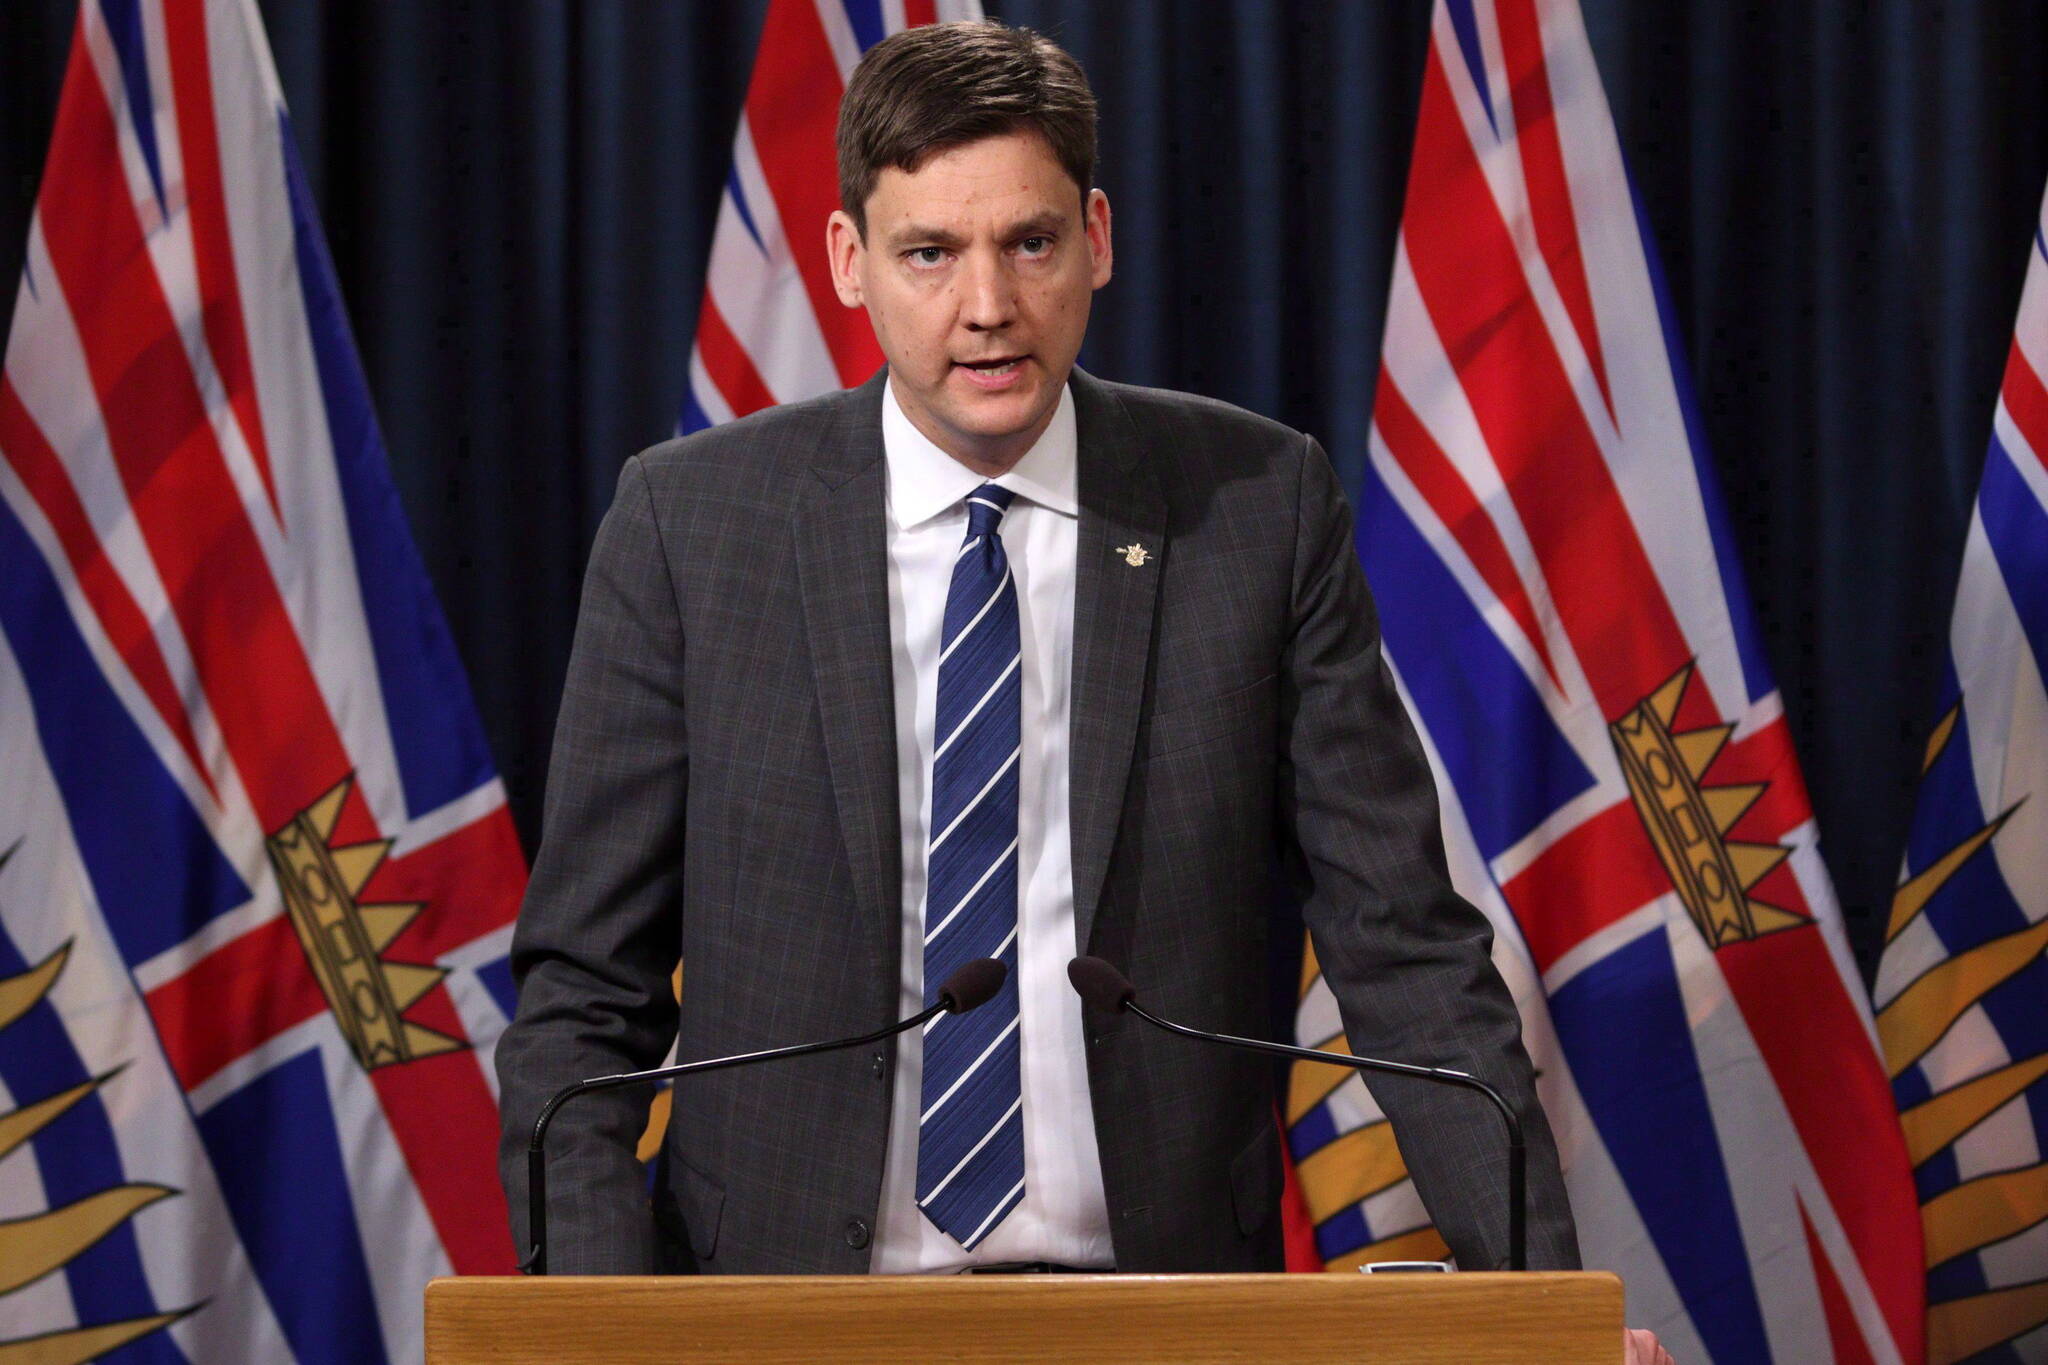 B.C. Premier David Eby said government is taking serious the recommendations following the release of a forensic audit into BC Housing. (Photo: THE CANADIAN PRESS/Chad Hipolito)